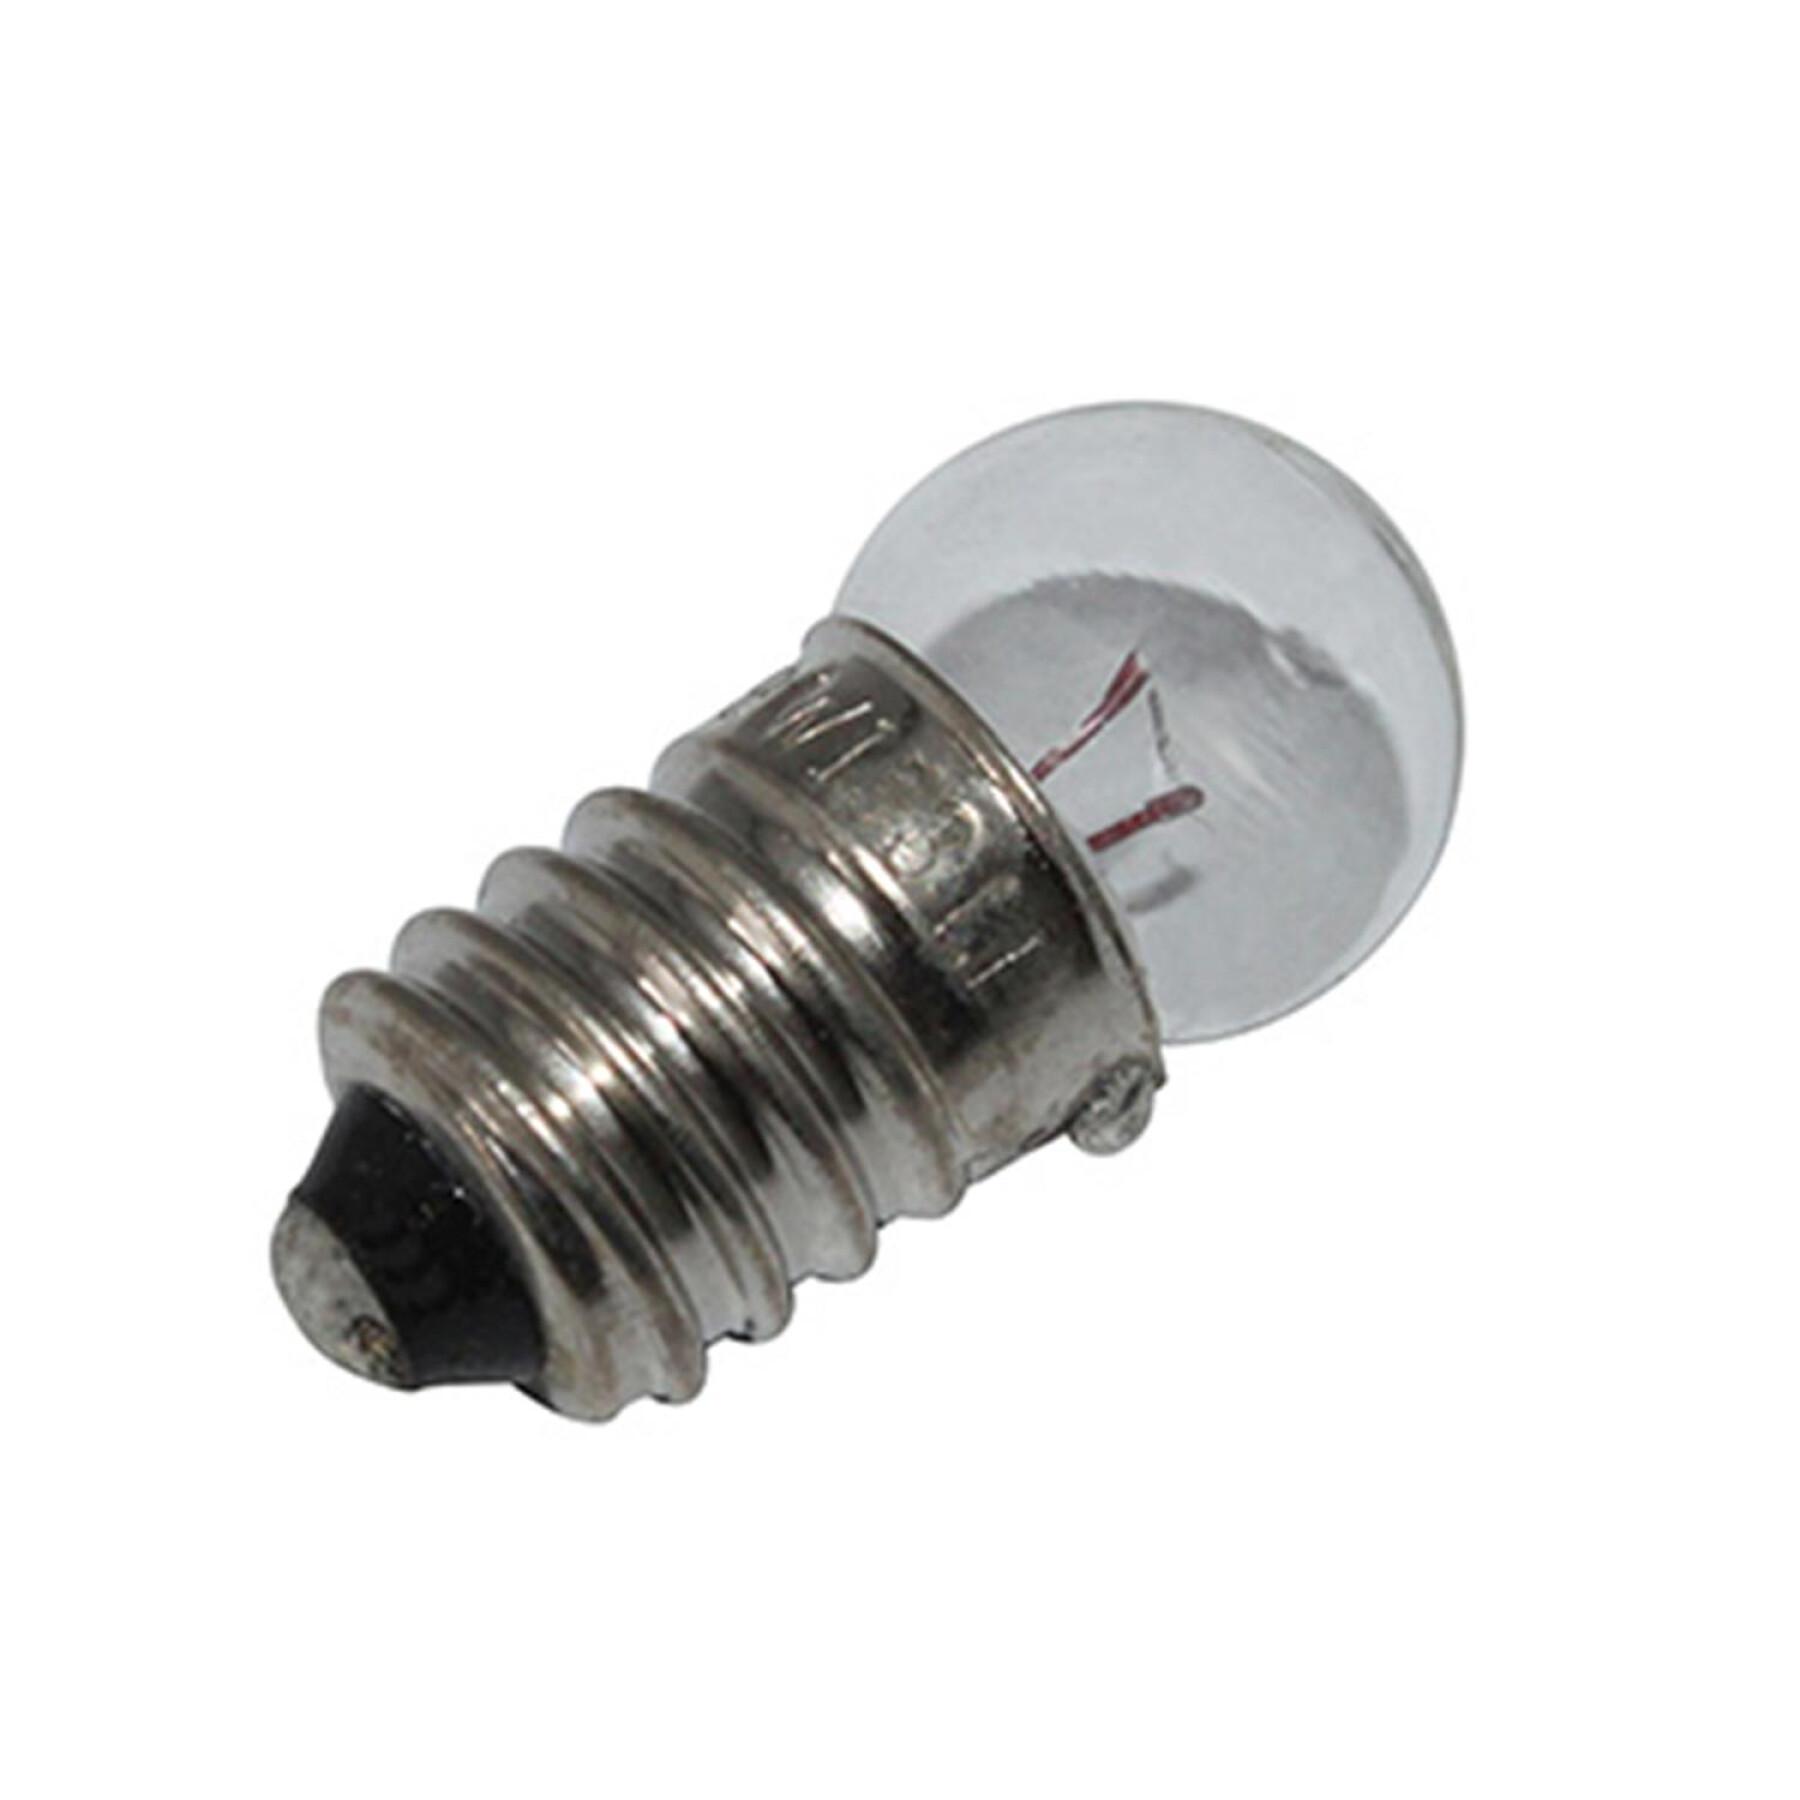 bicycle lighting bulb - lamp grease nipple to screw rear position light Flosser